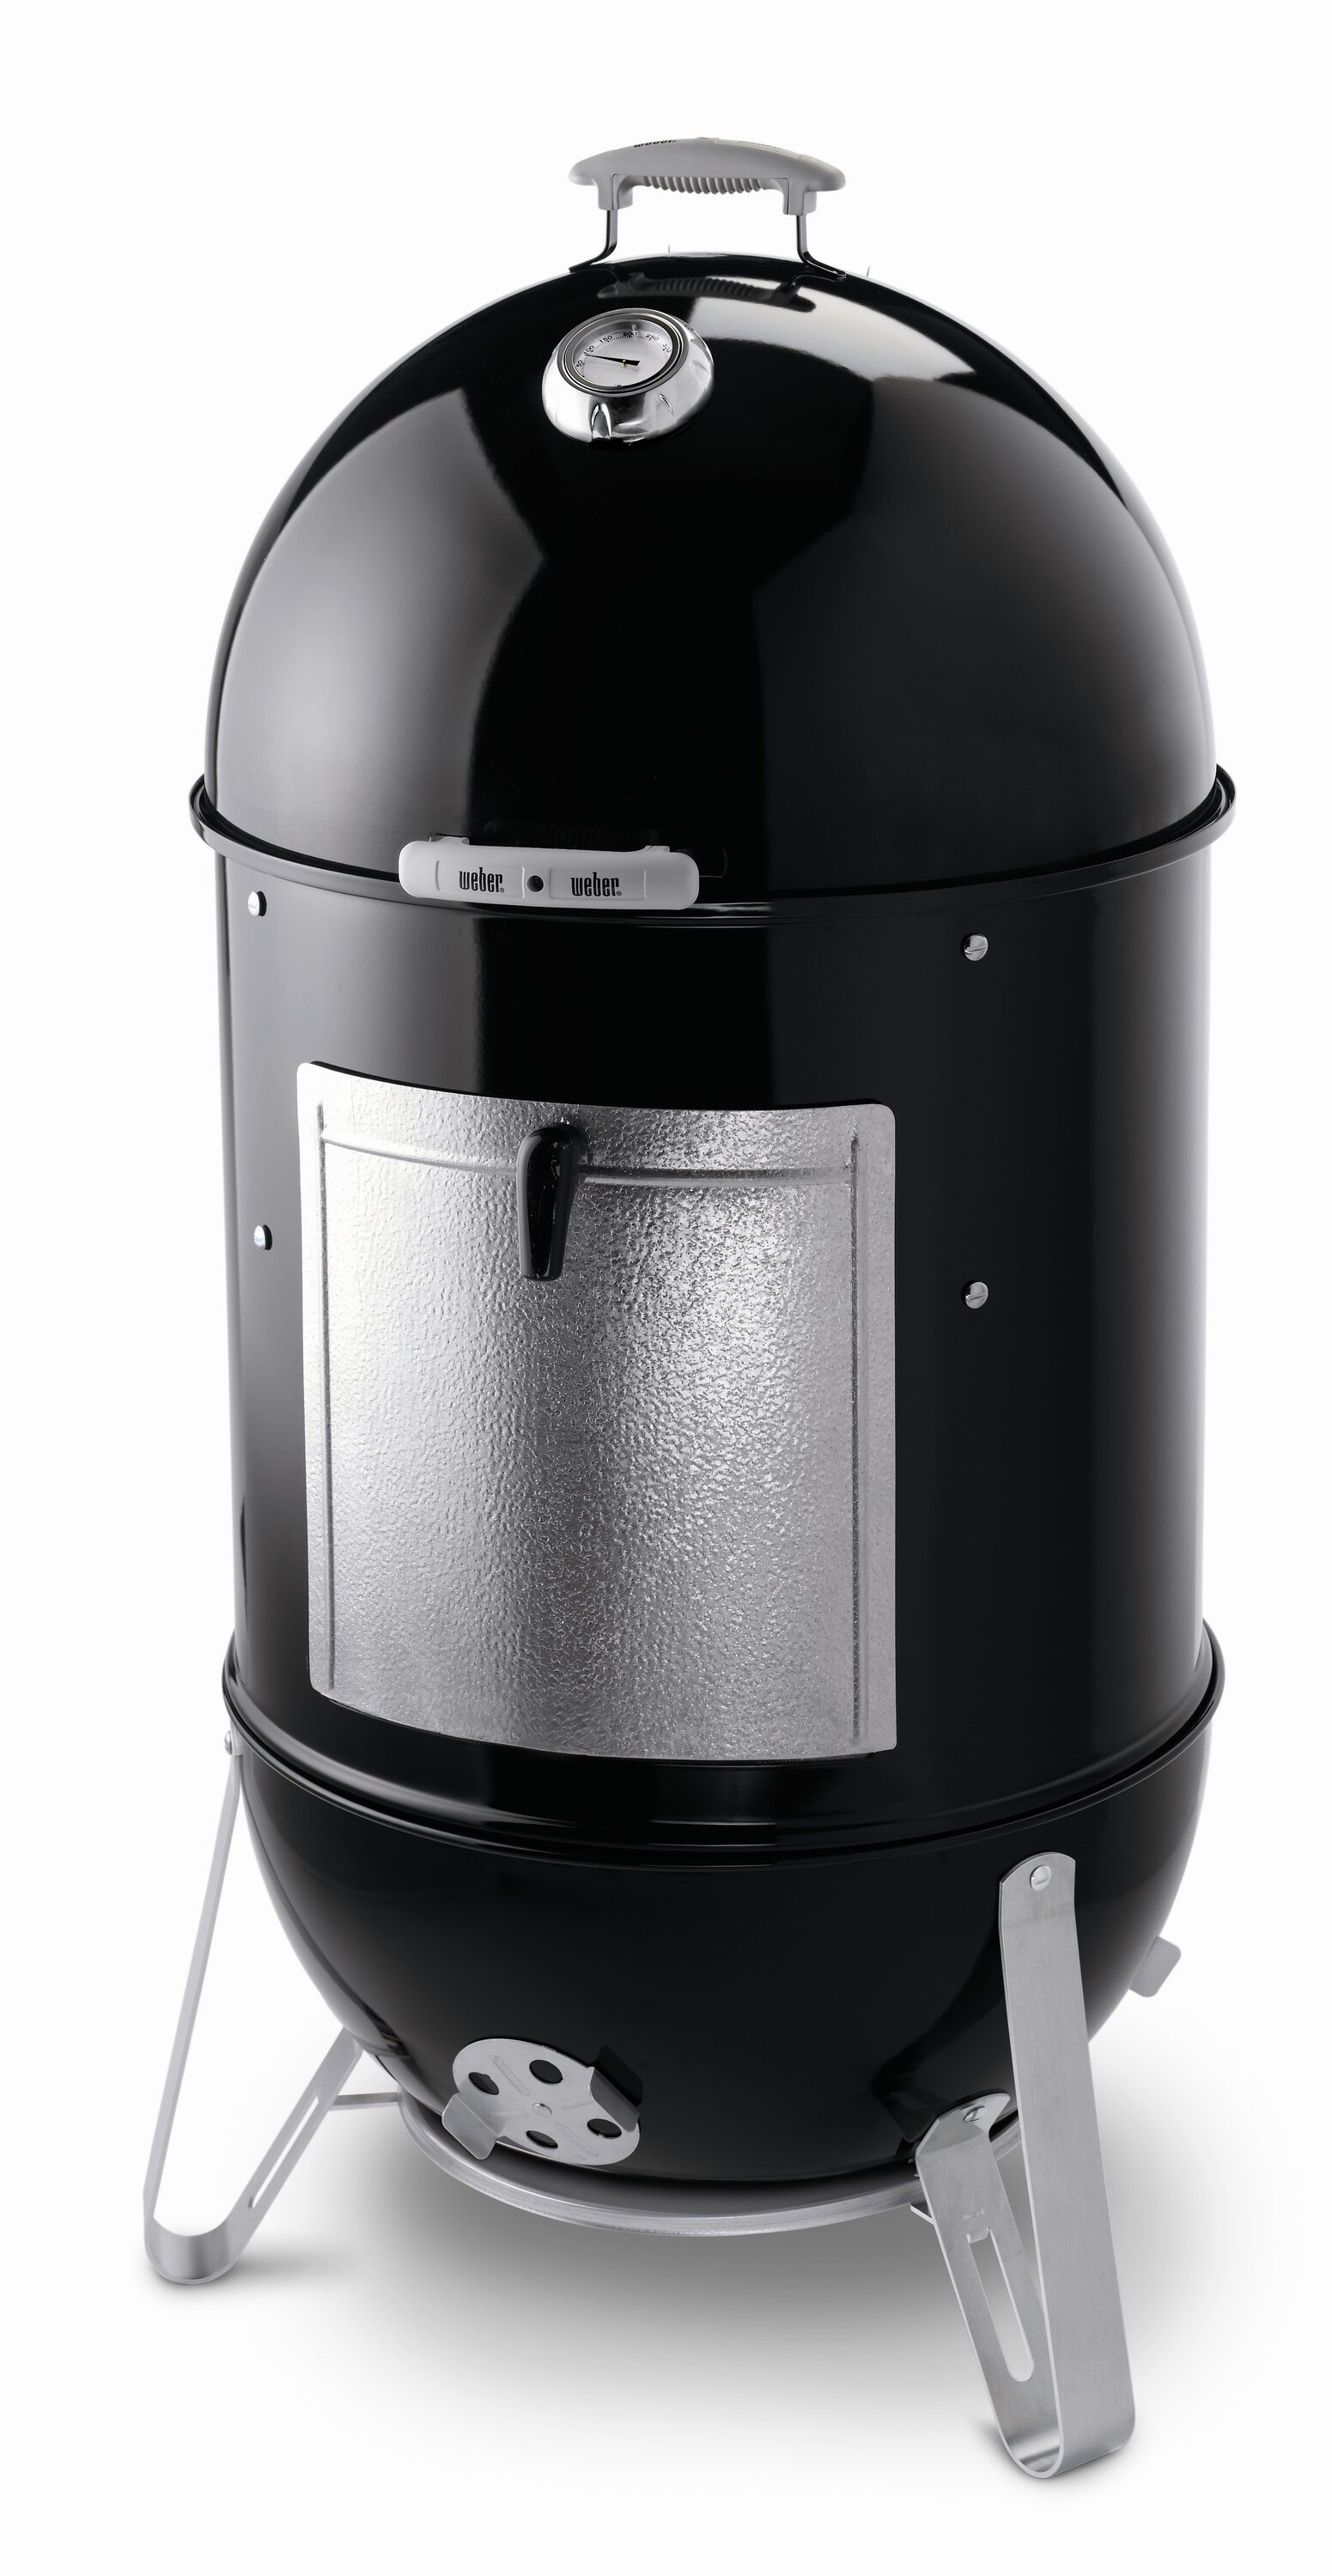 Weber 726-Sq in Black Vertical Charcoal Smoker in the Charcoal 